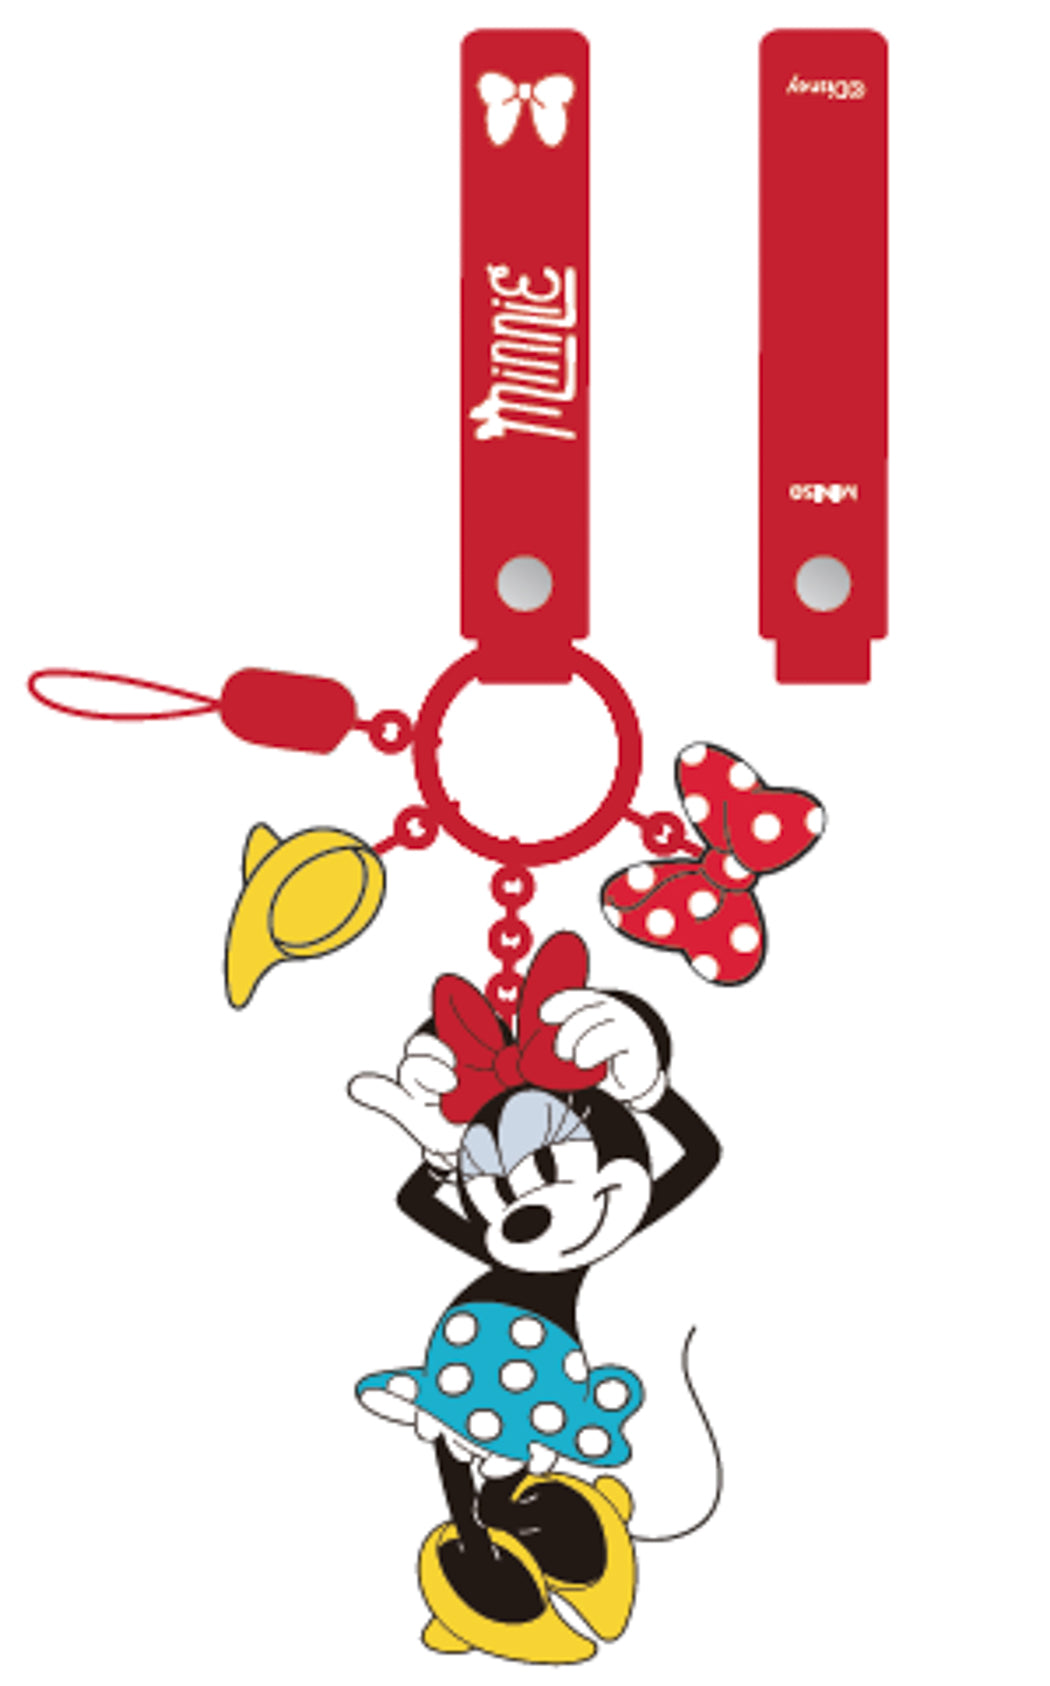 MINISO MICKEY MOUSE COLLECTION PHONE CHARM STRAP(MINNIE) 2012193911108 PHONE STRAP